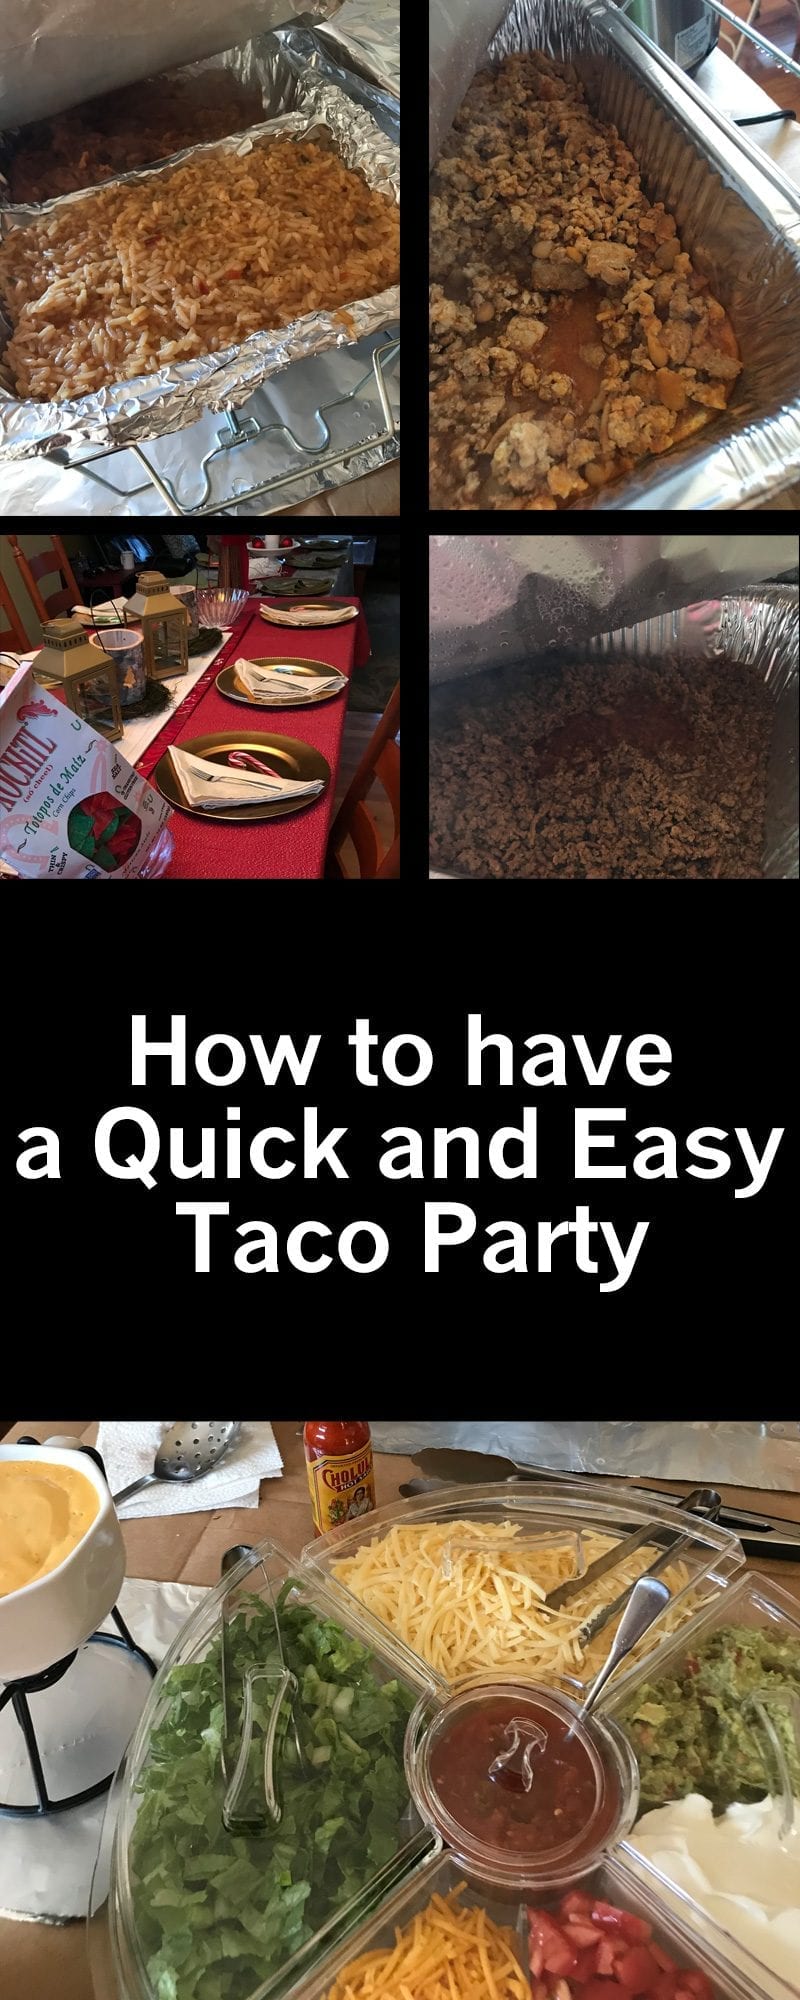 How to have a quick and easy taco party